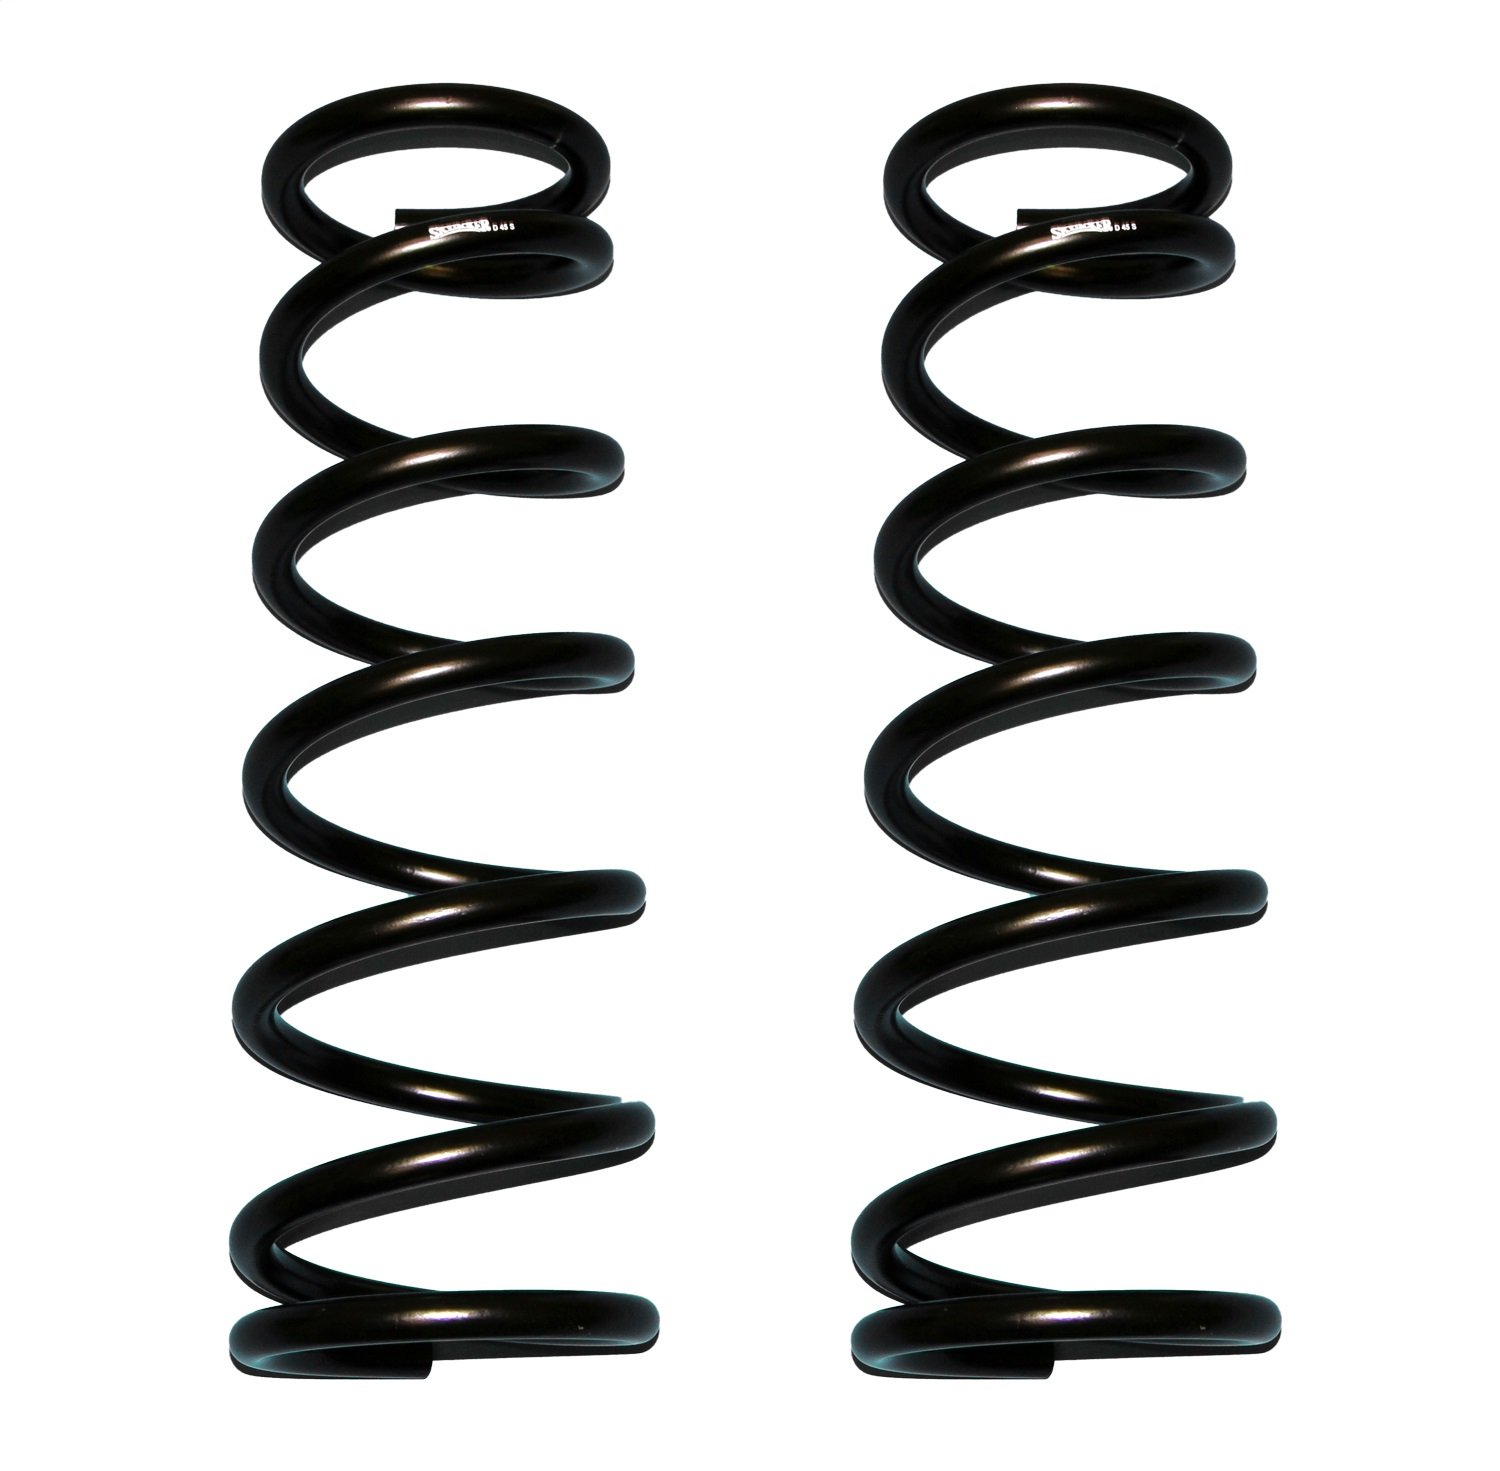 Softride Front Coil Springs 1994-2012 Ram Pickup 3/4-Ton/Heavy Duty & Ram Pickup 1-Ton (4-4.5" Lift)